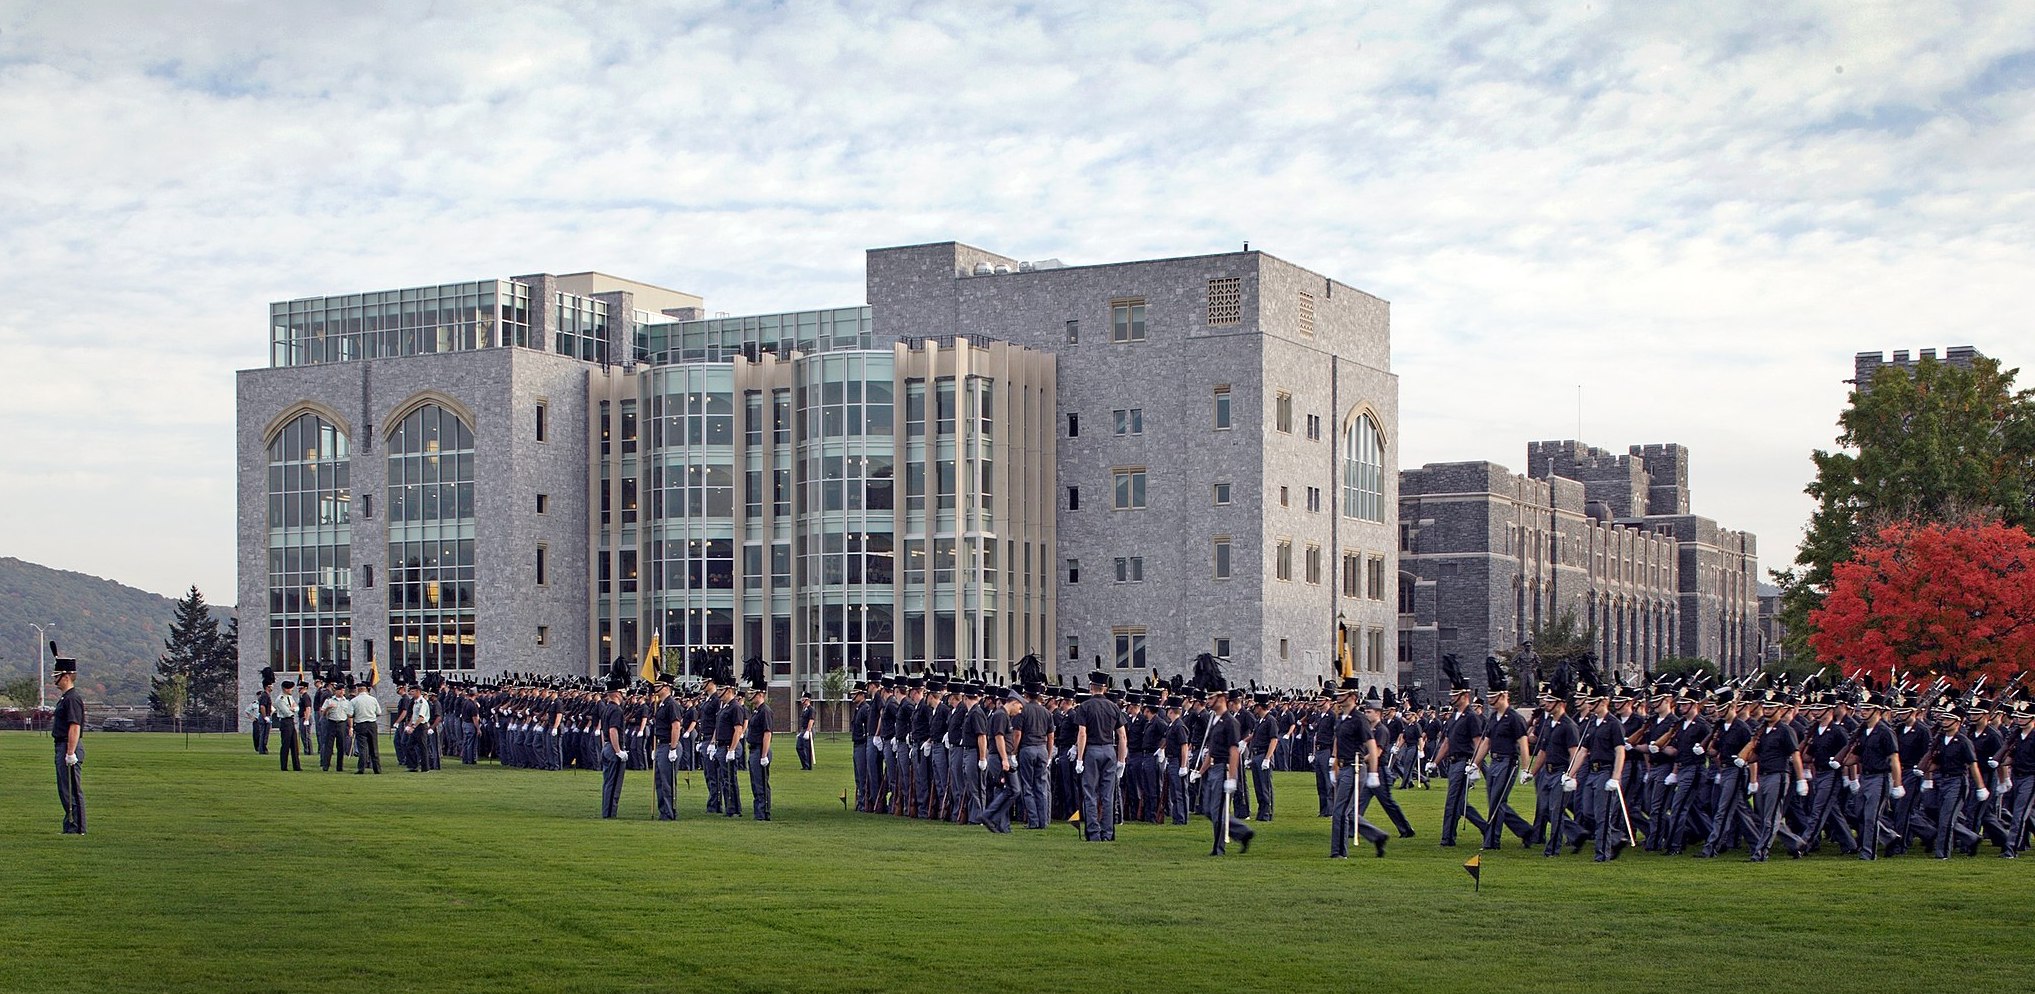 US federal judge rules West Point can use race as factor when considering applicants